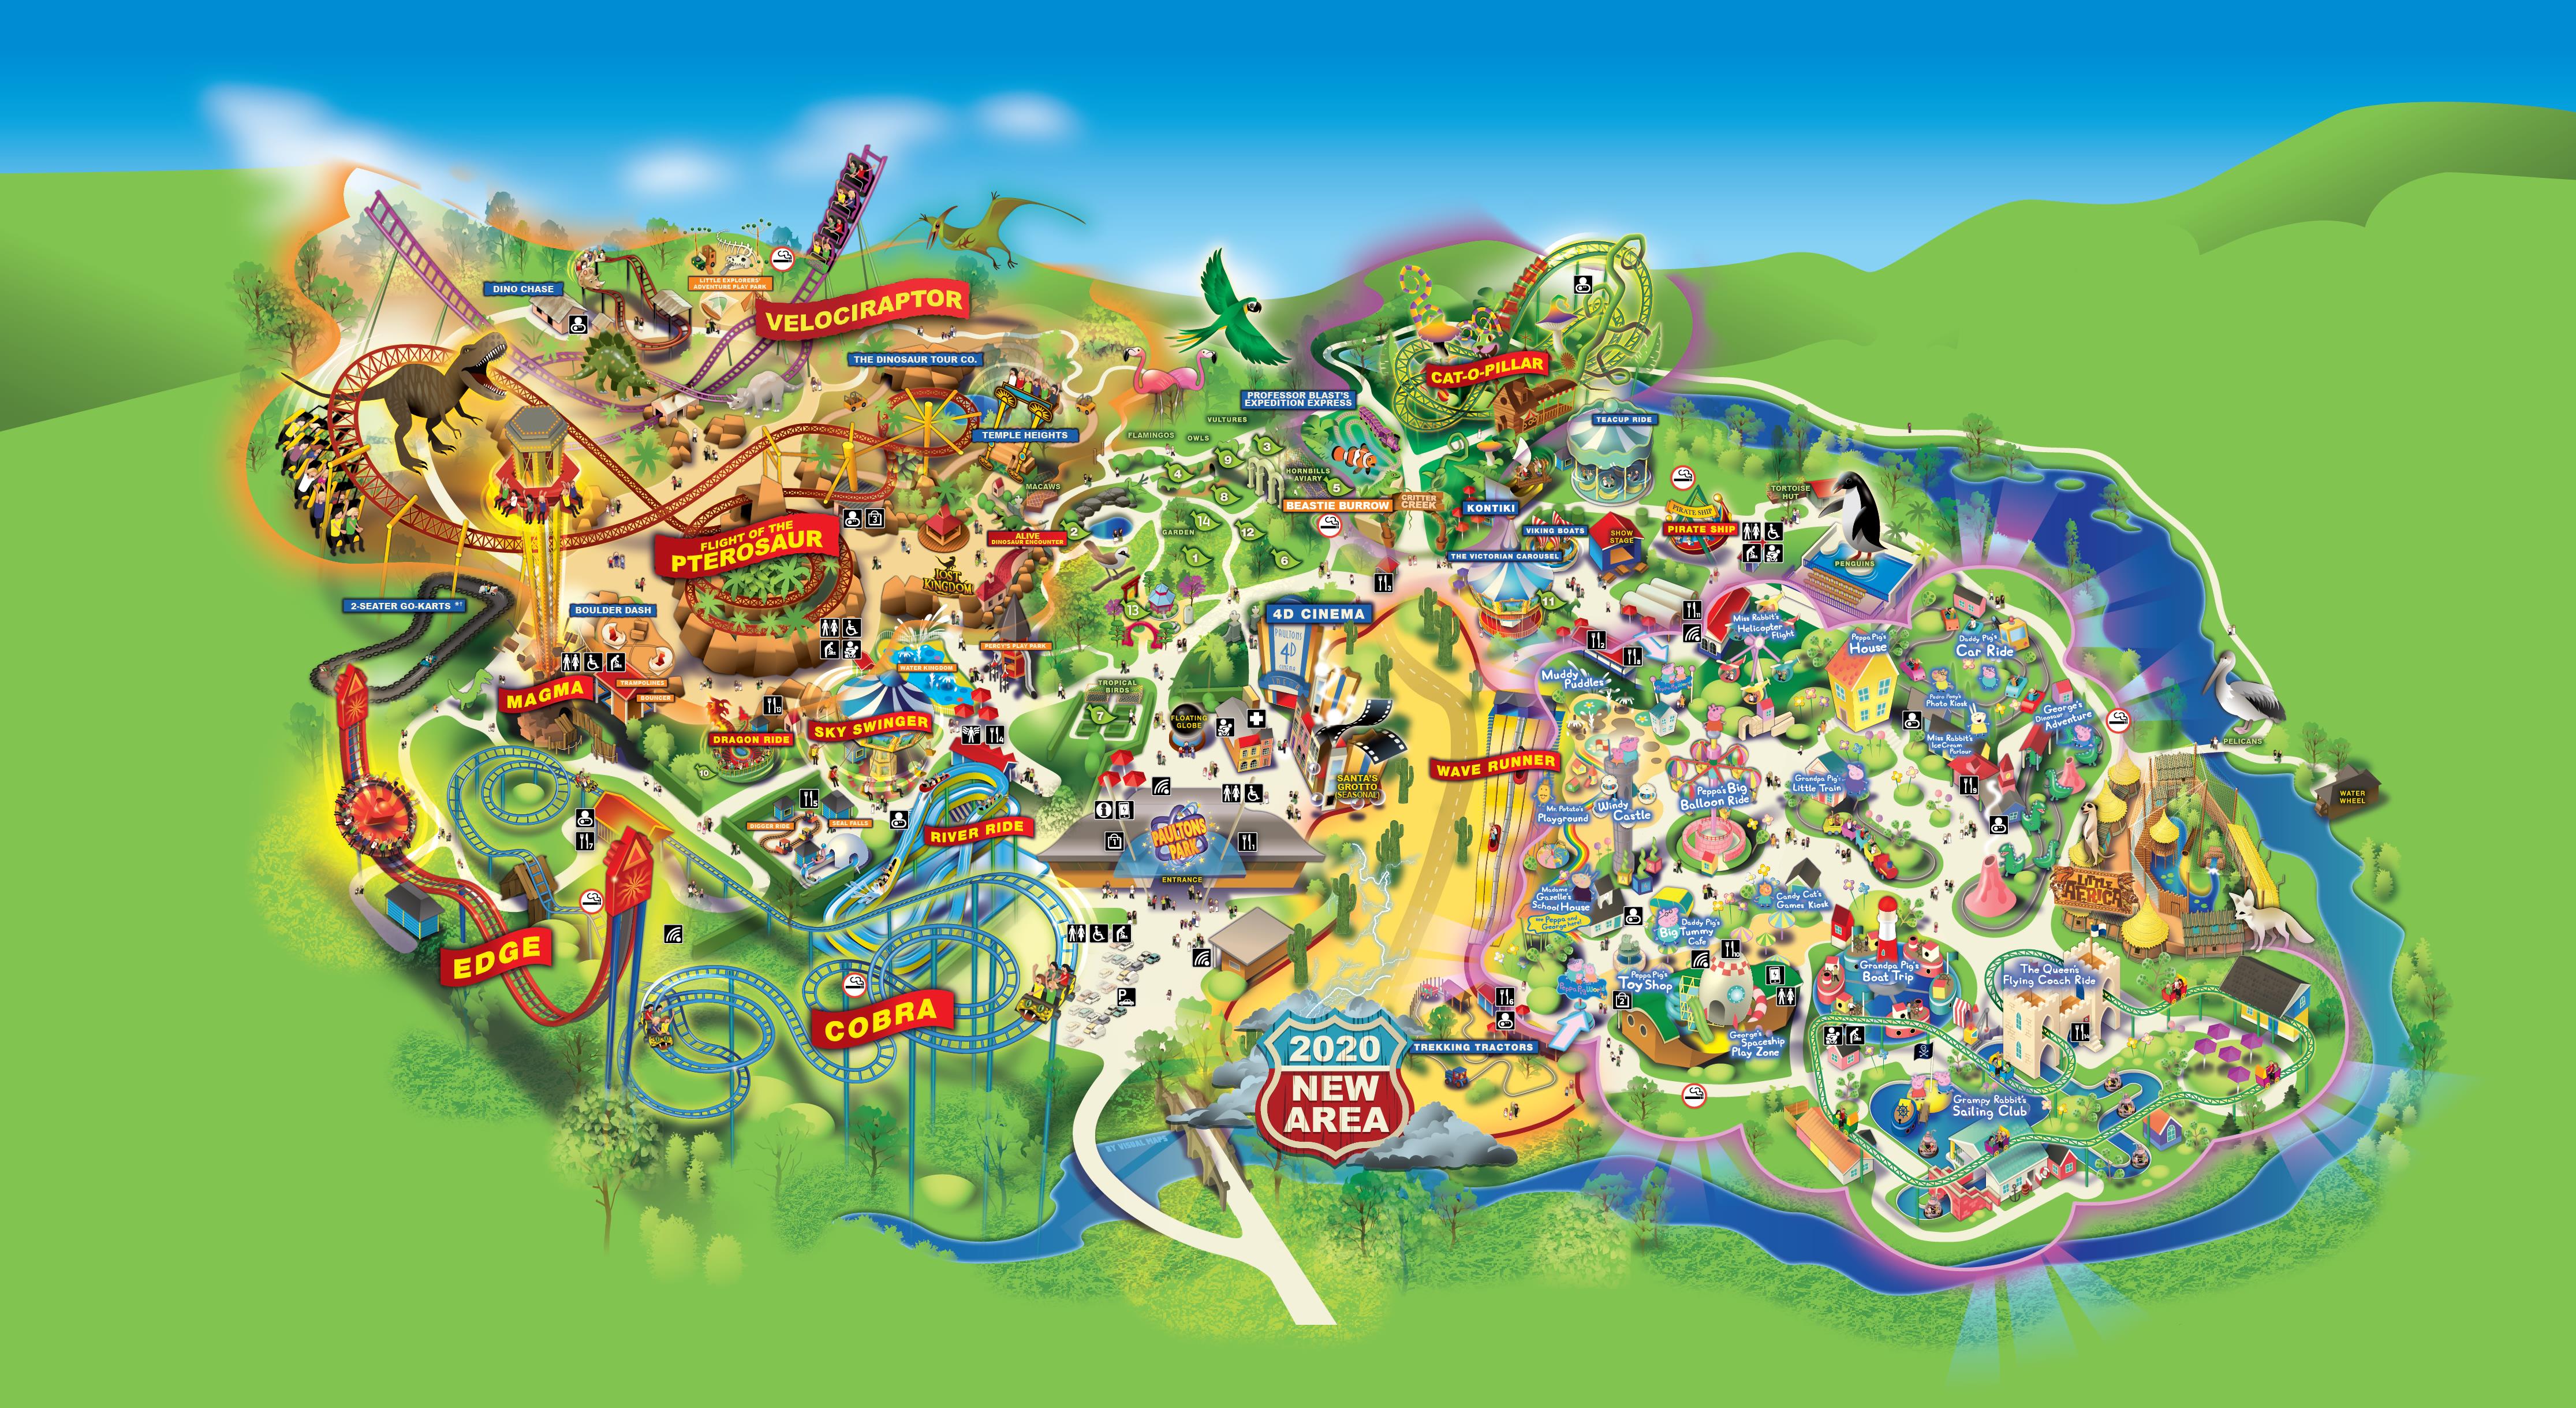 Divertical Theme Park Map Theme Park Map Theme Park Theme | Images and ...